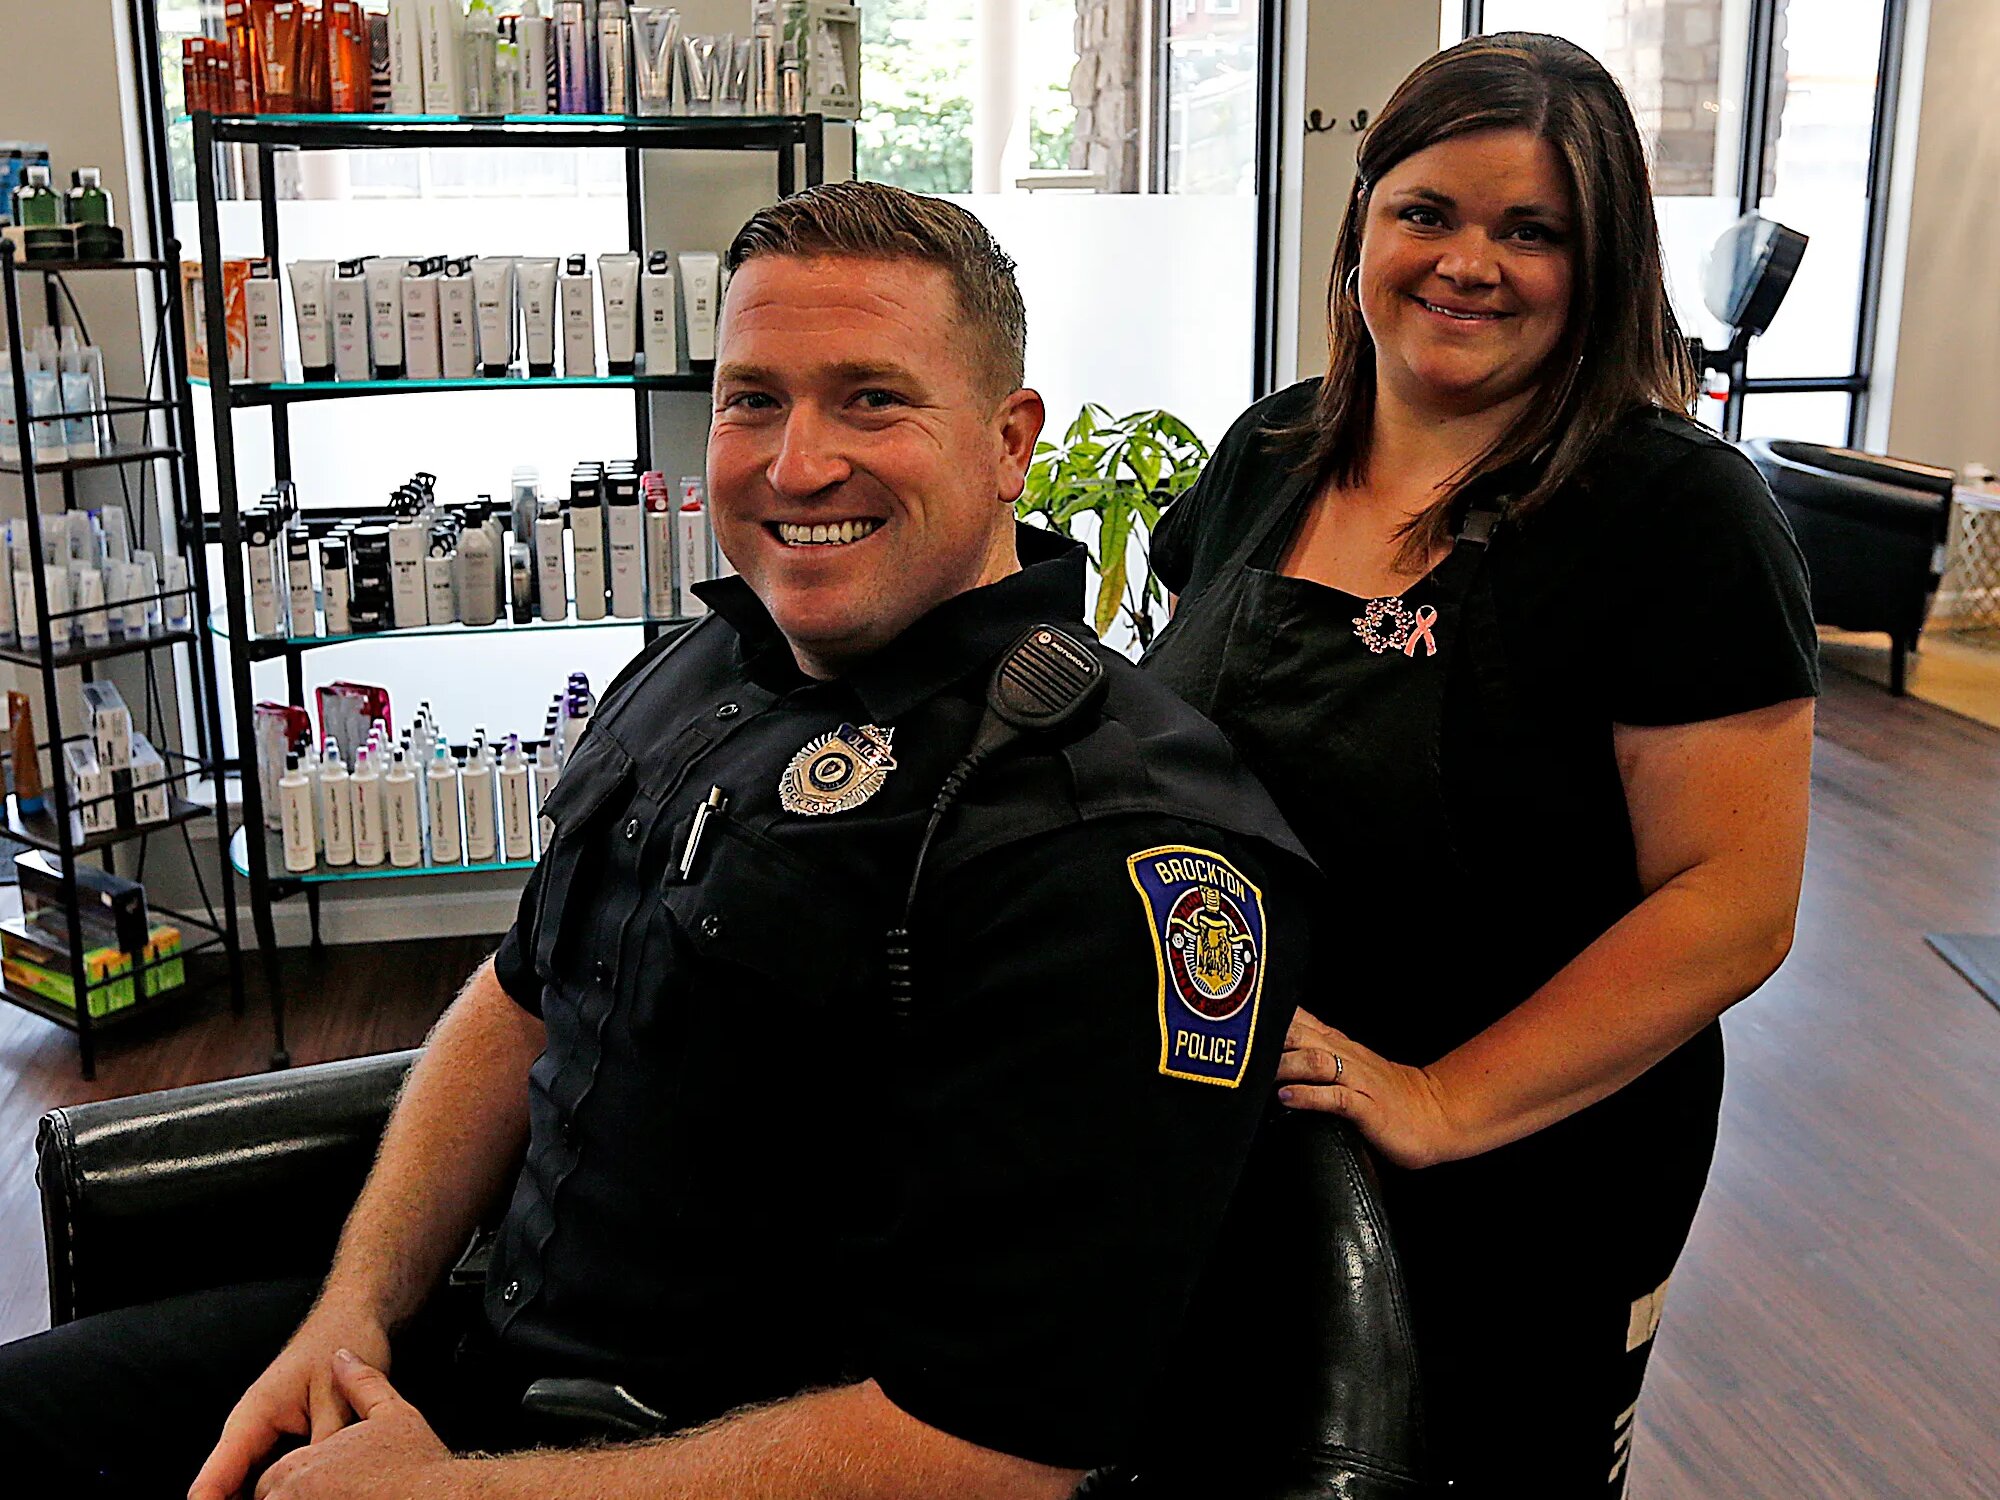 Police Haircut Standards and Styles: Impacts on Law Enforcement and Public Relations